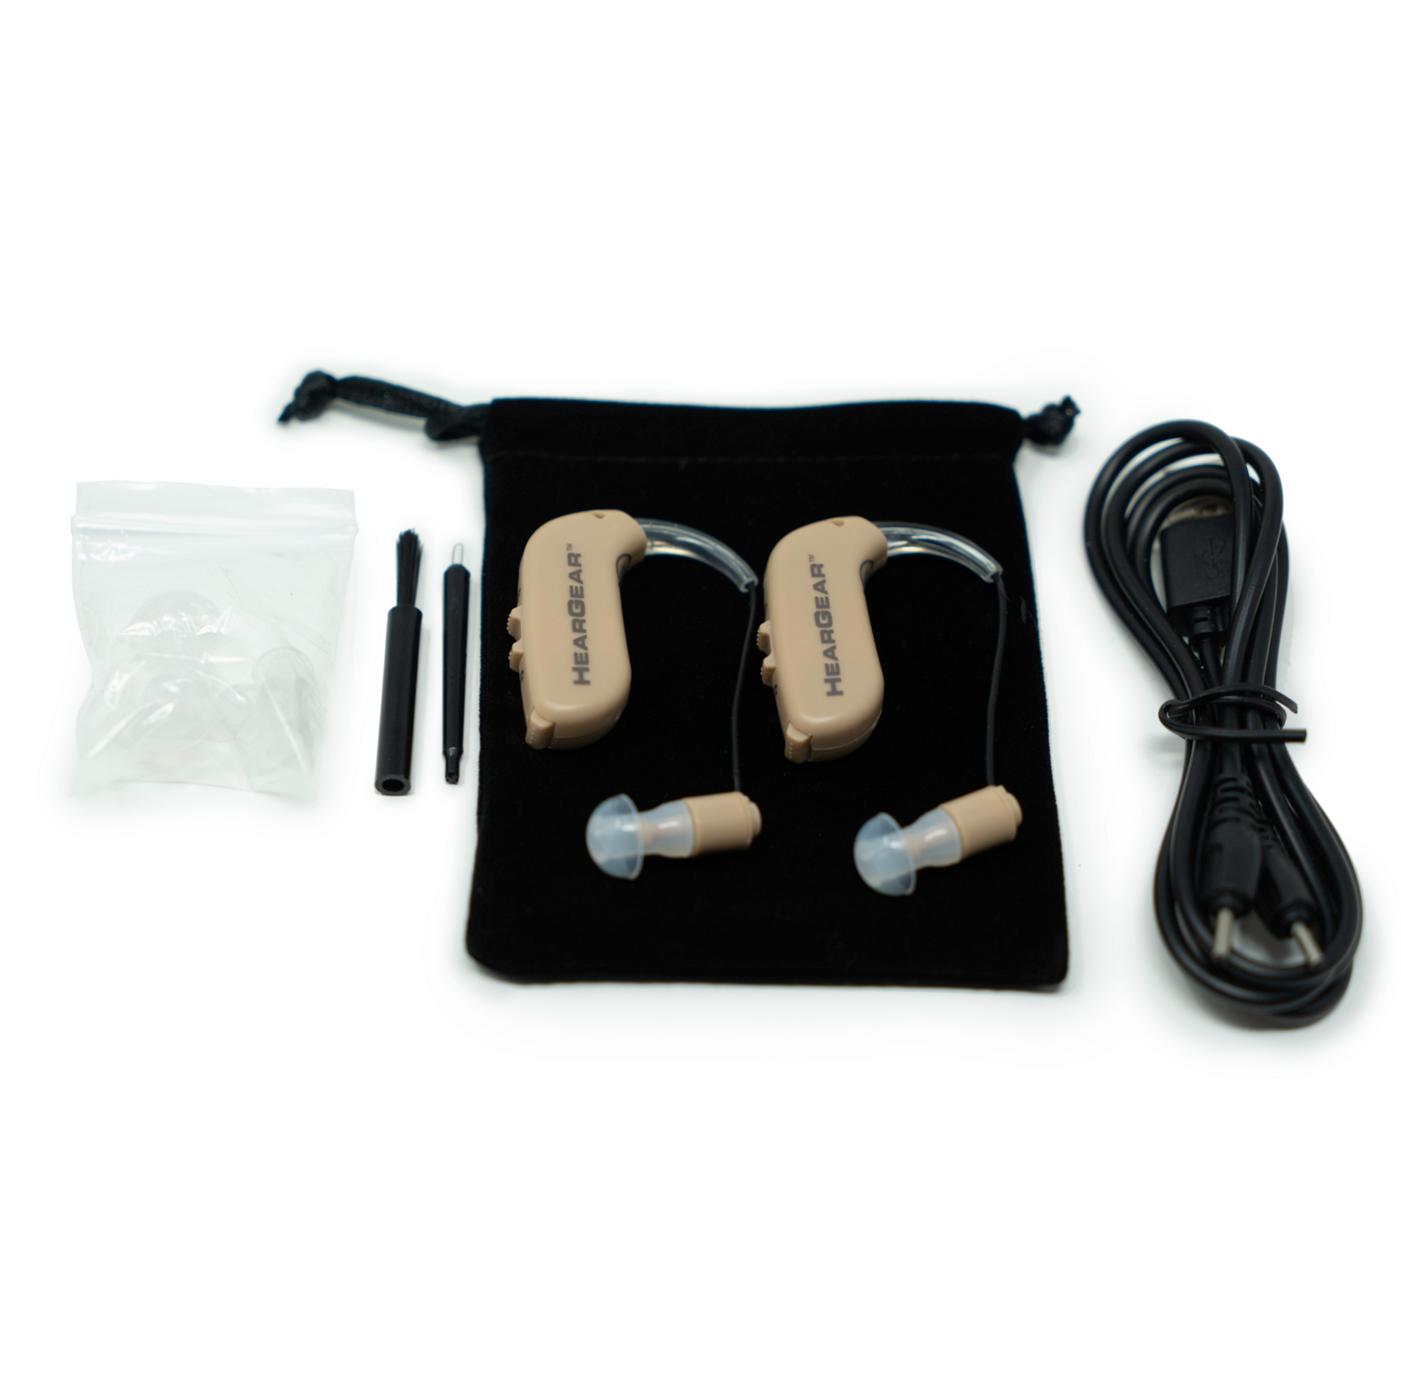 Lucid Audio HearGear Personal Rechargeable Hearing Amplifiers; image 3 of 3